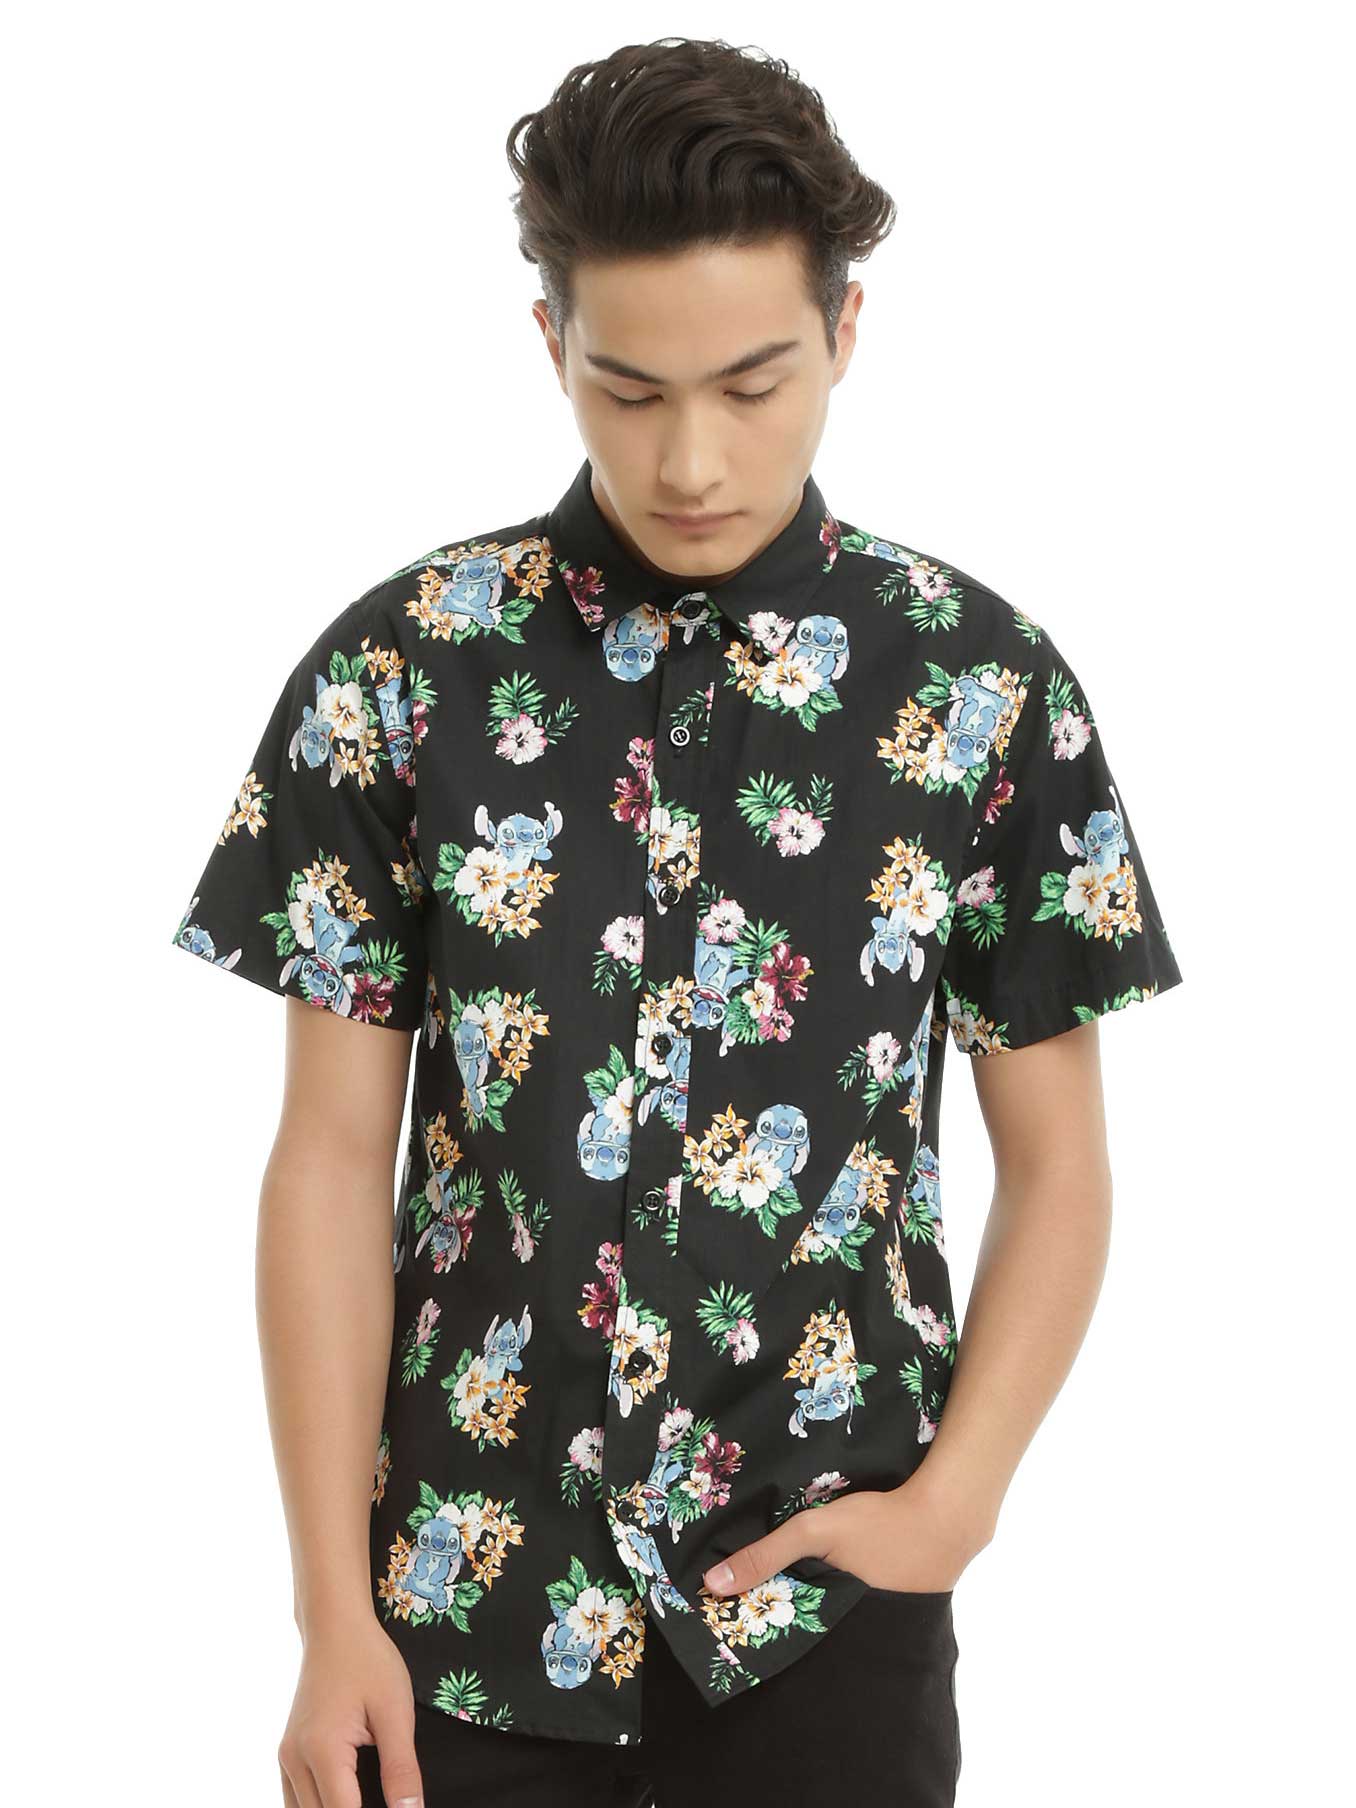 mens short sleeve shirt with flowers